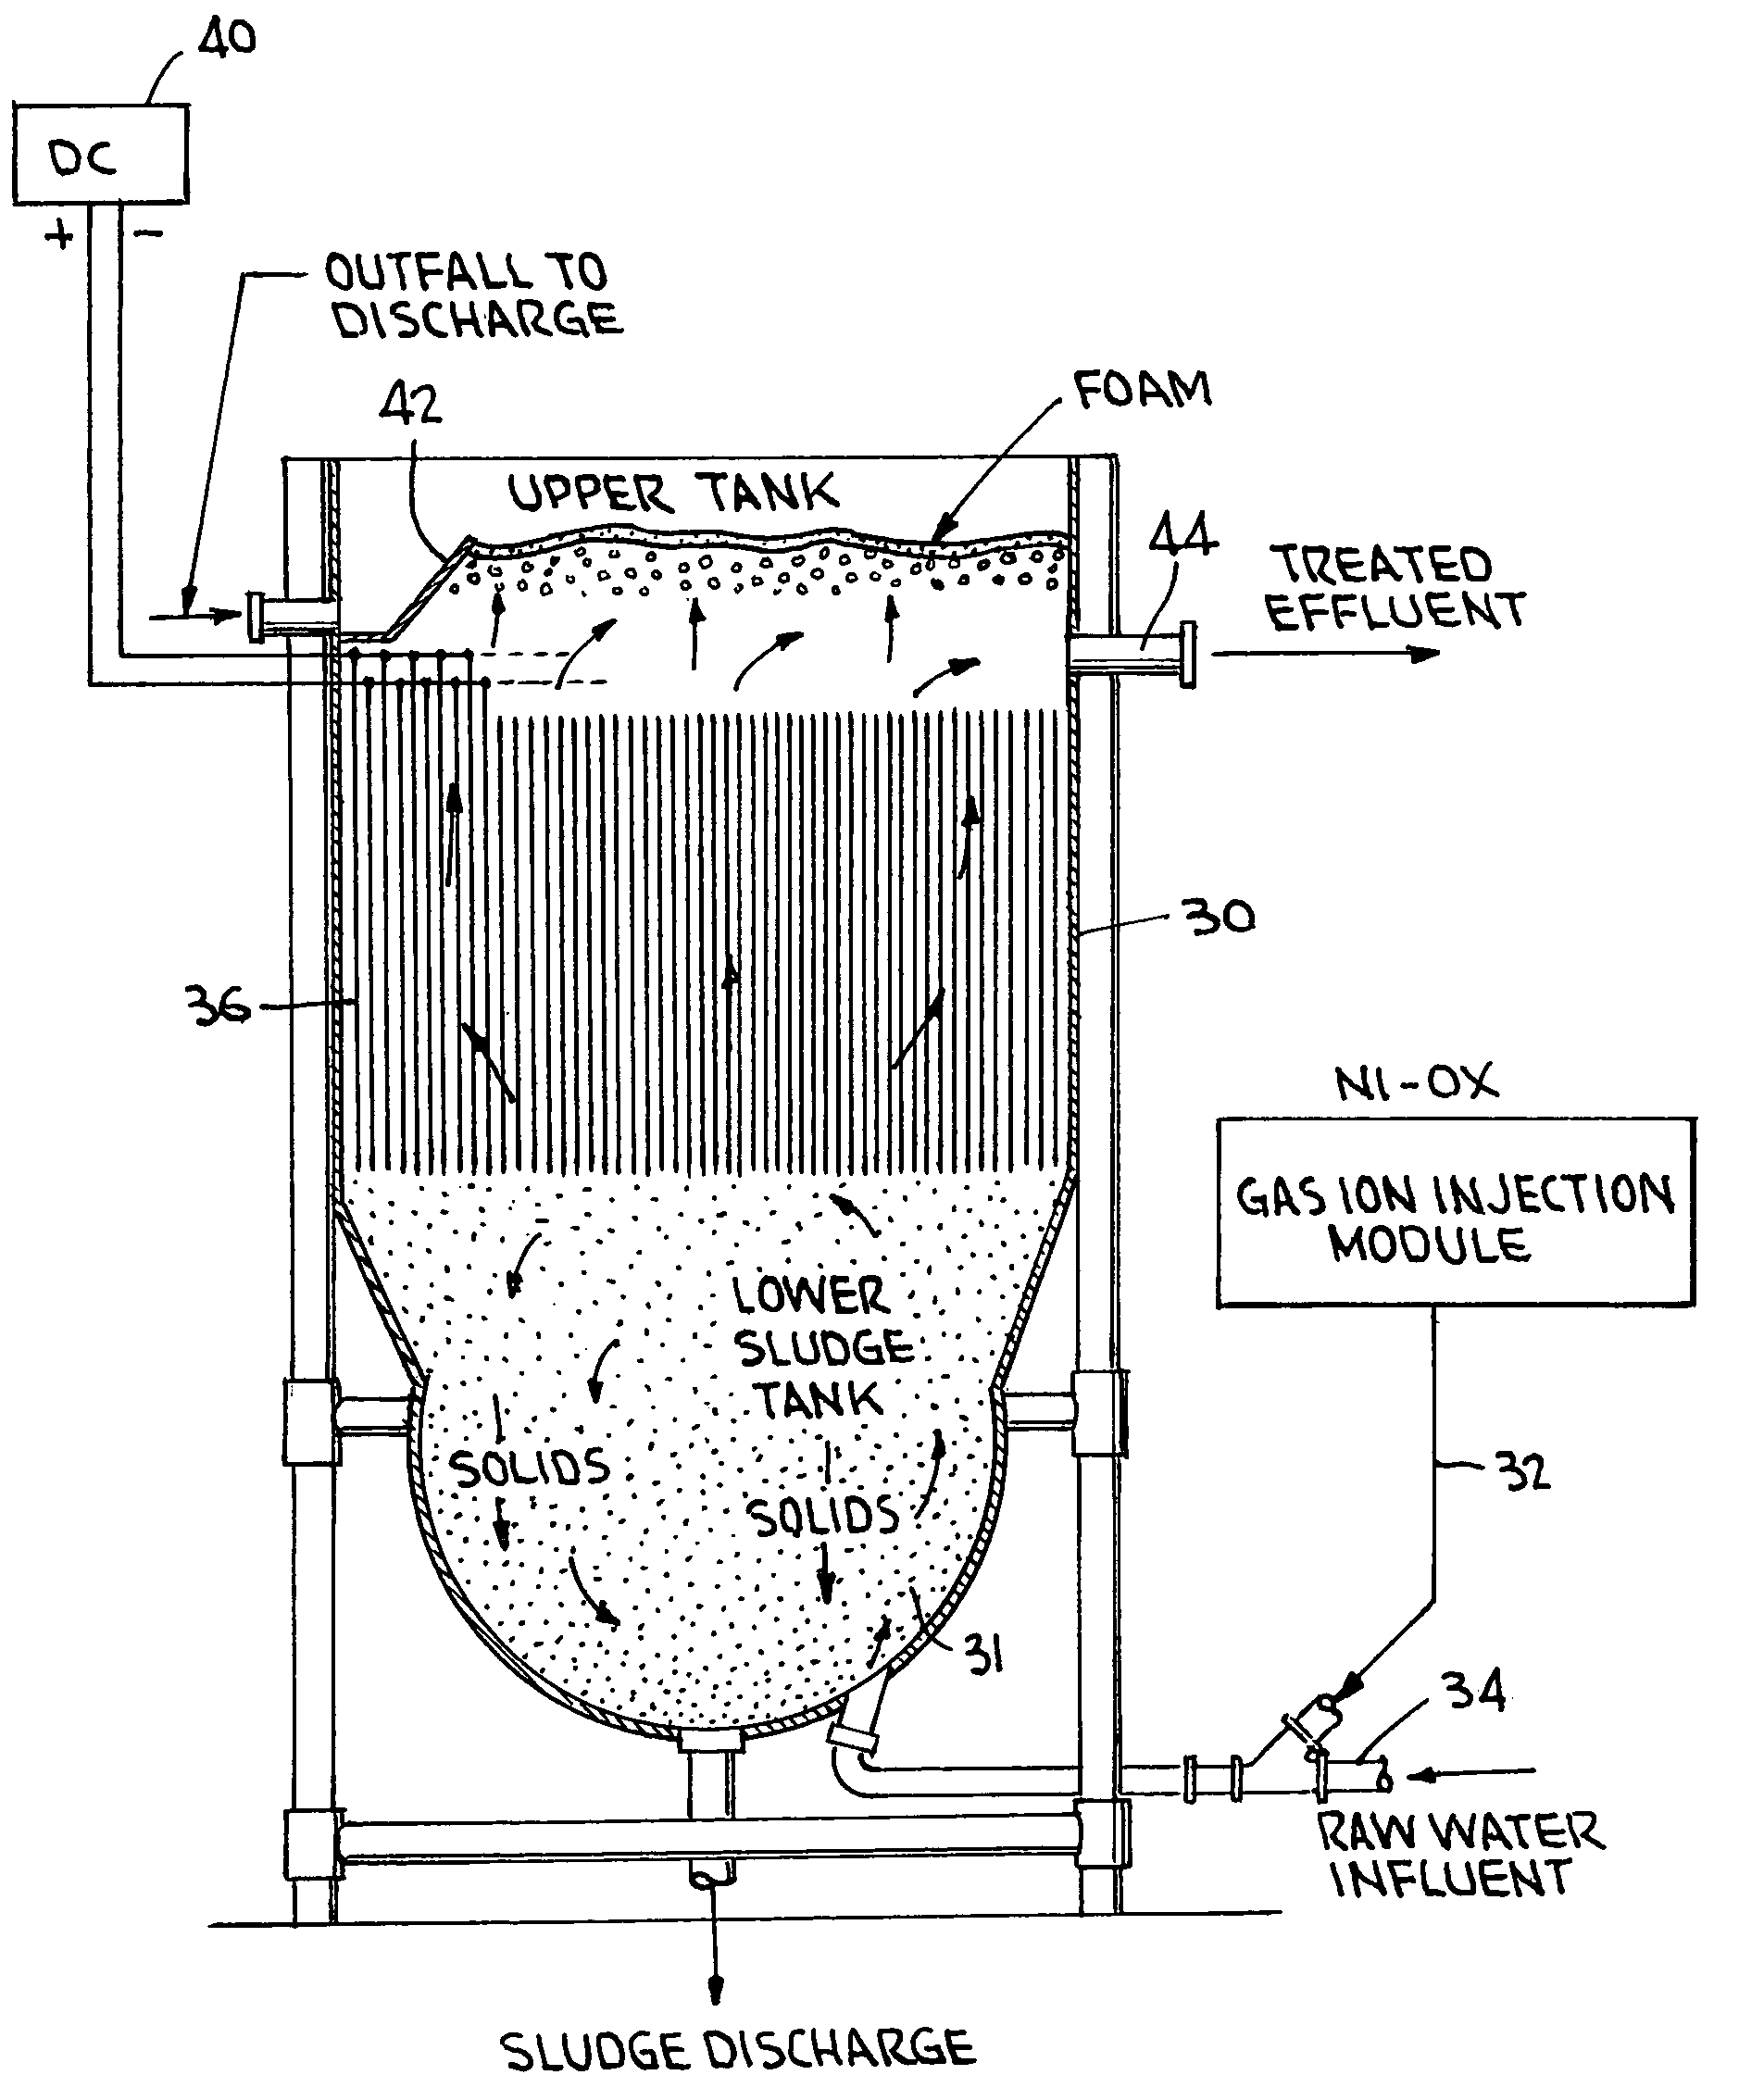 Non-chemical water treatment method and apparatus employing ionized air purification technologies